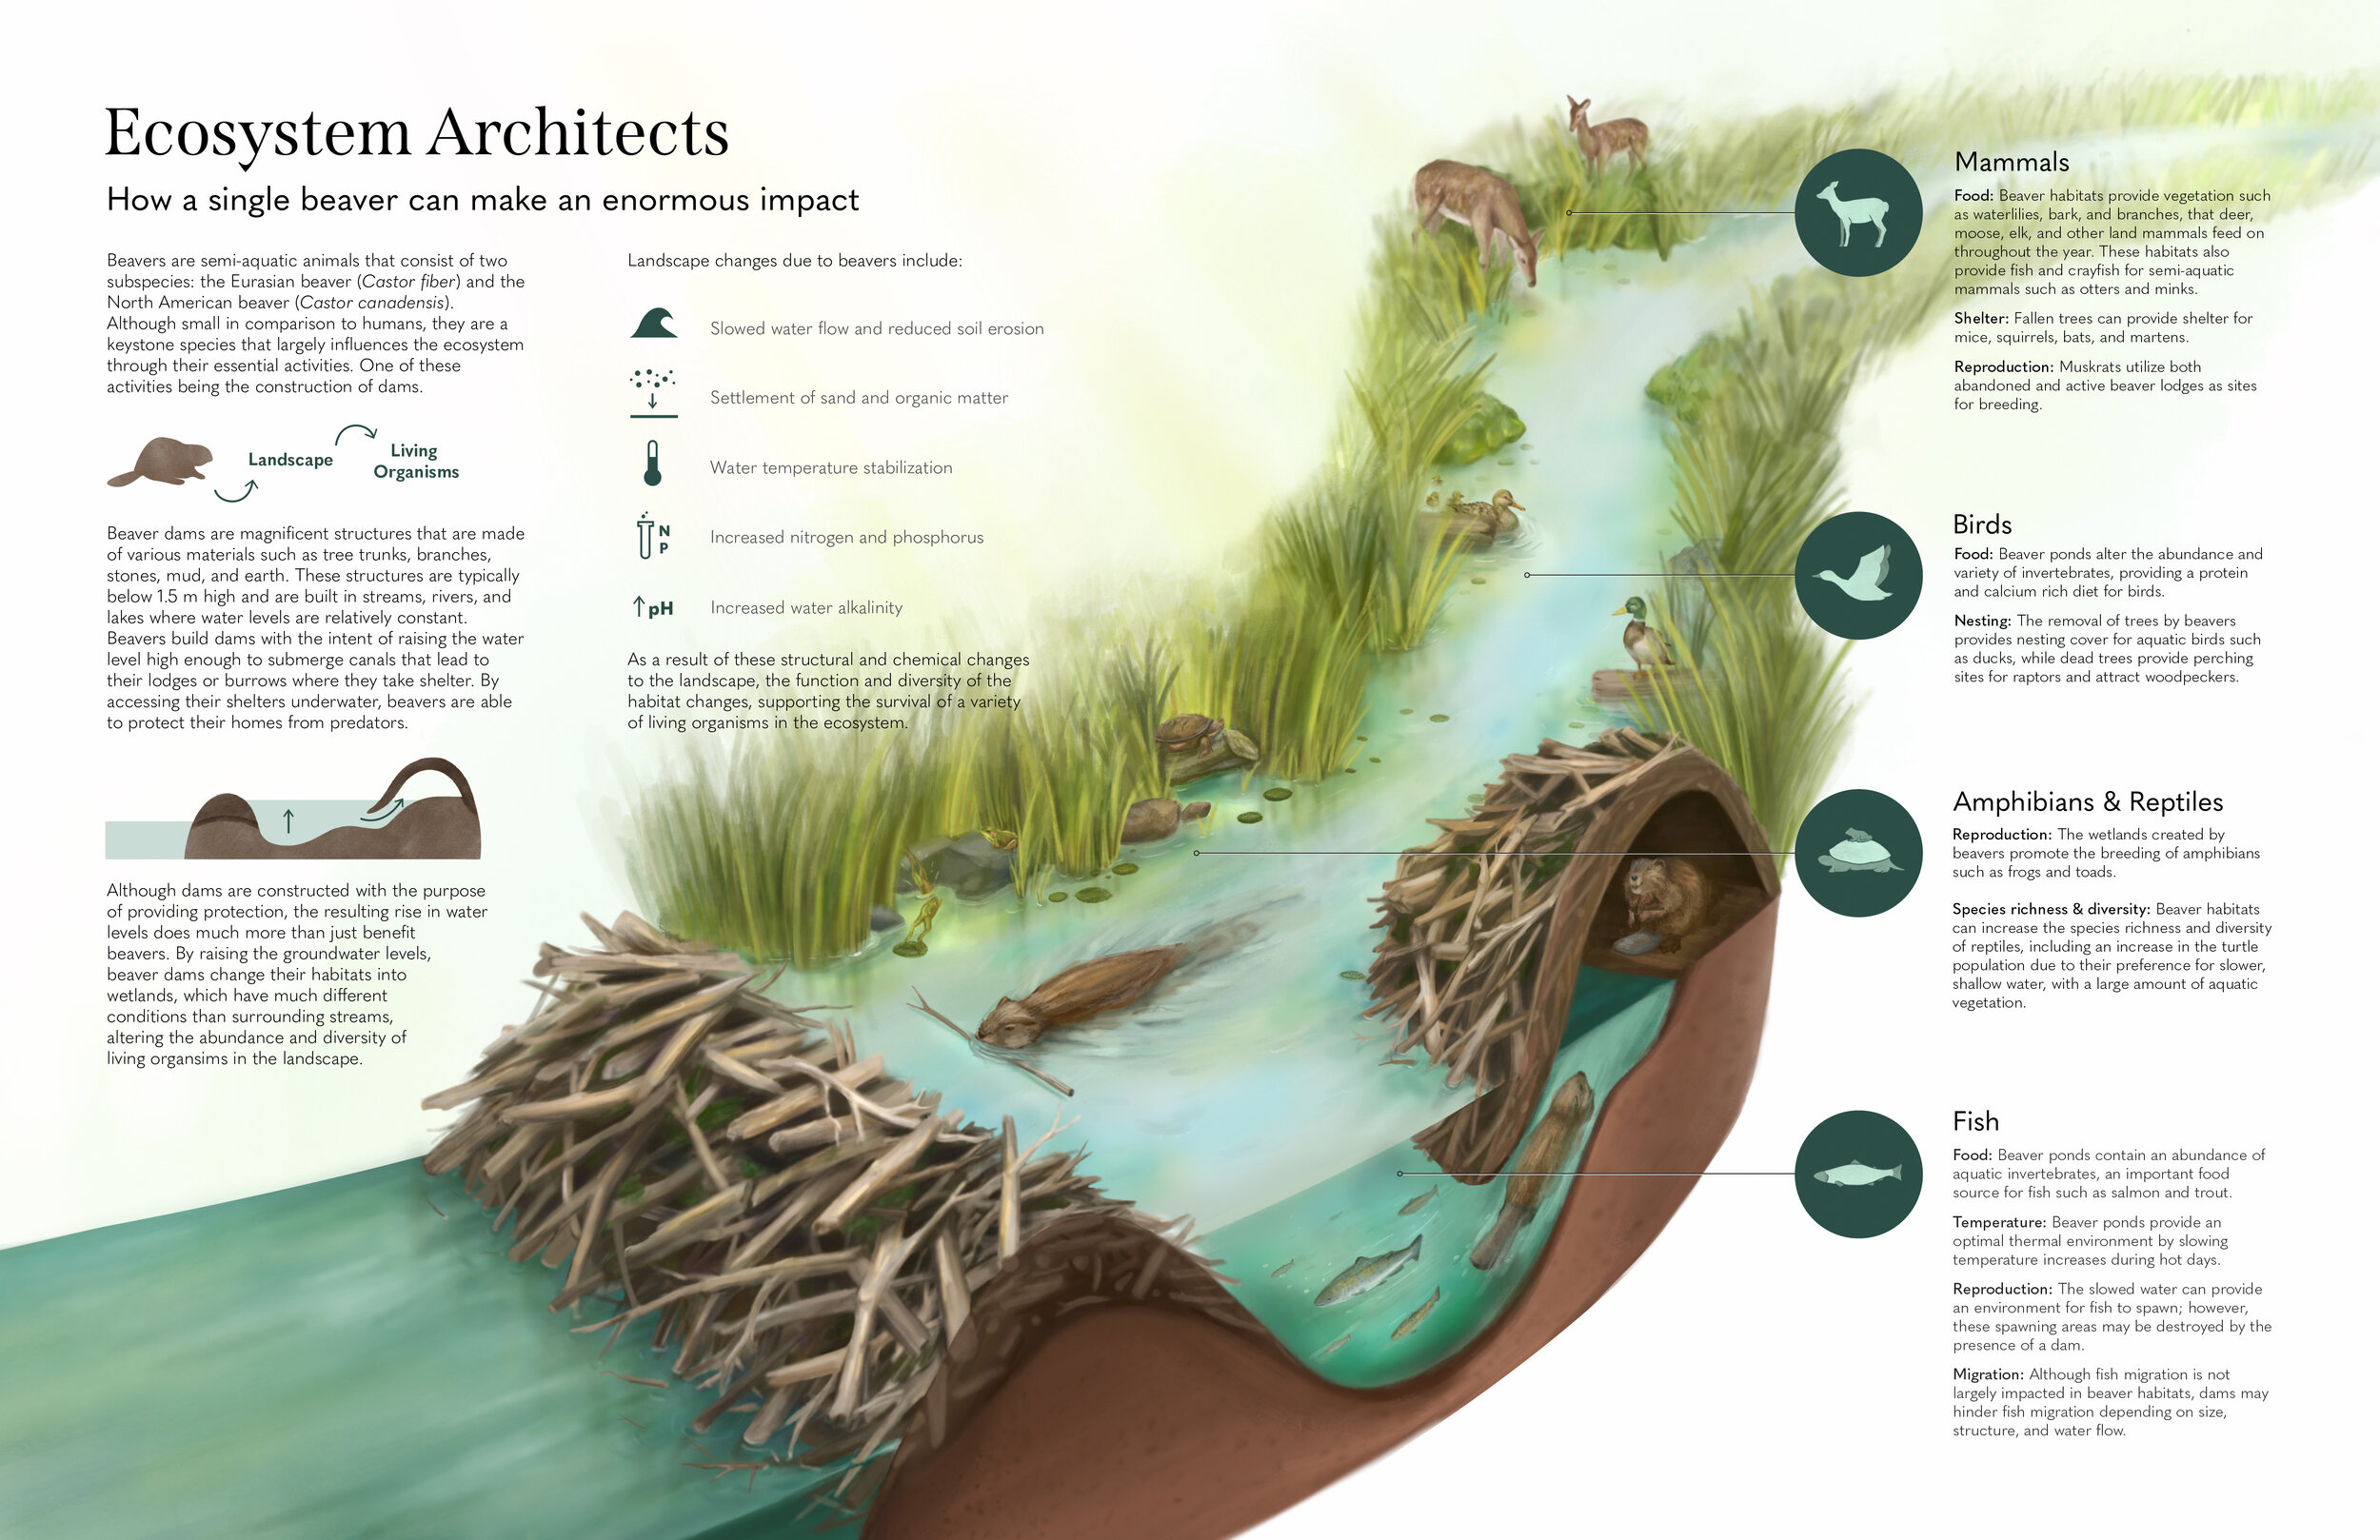 Ecosystem Architects: Infographic on the beaver's impact on an aquatic ecosystem.